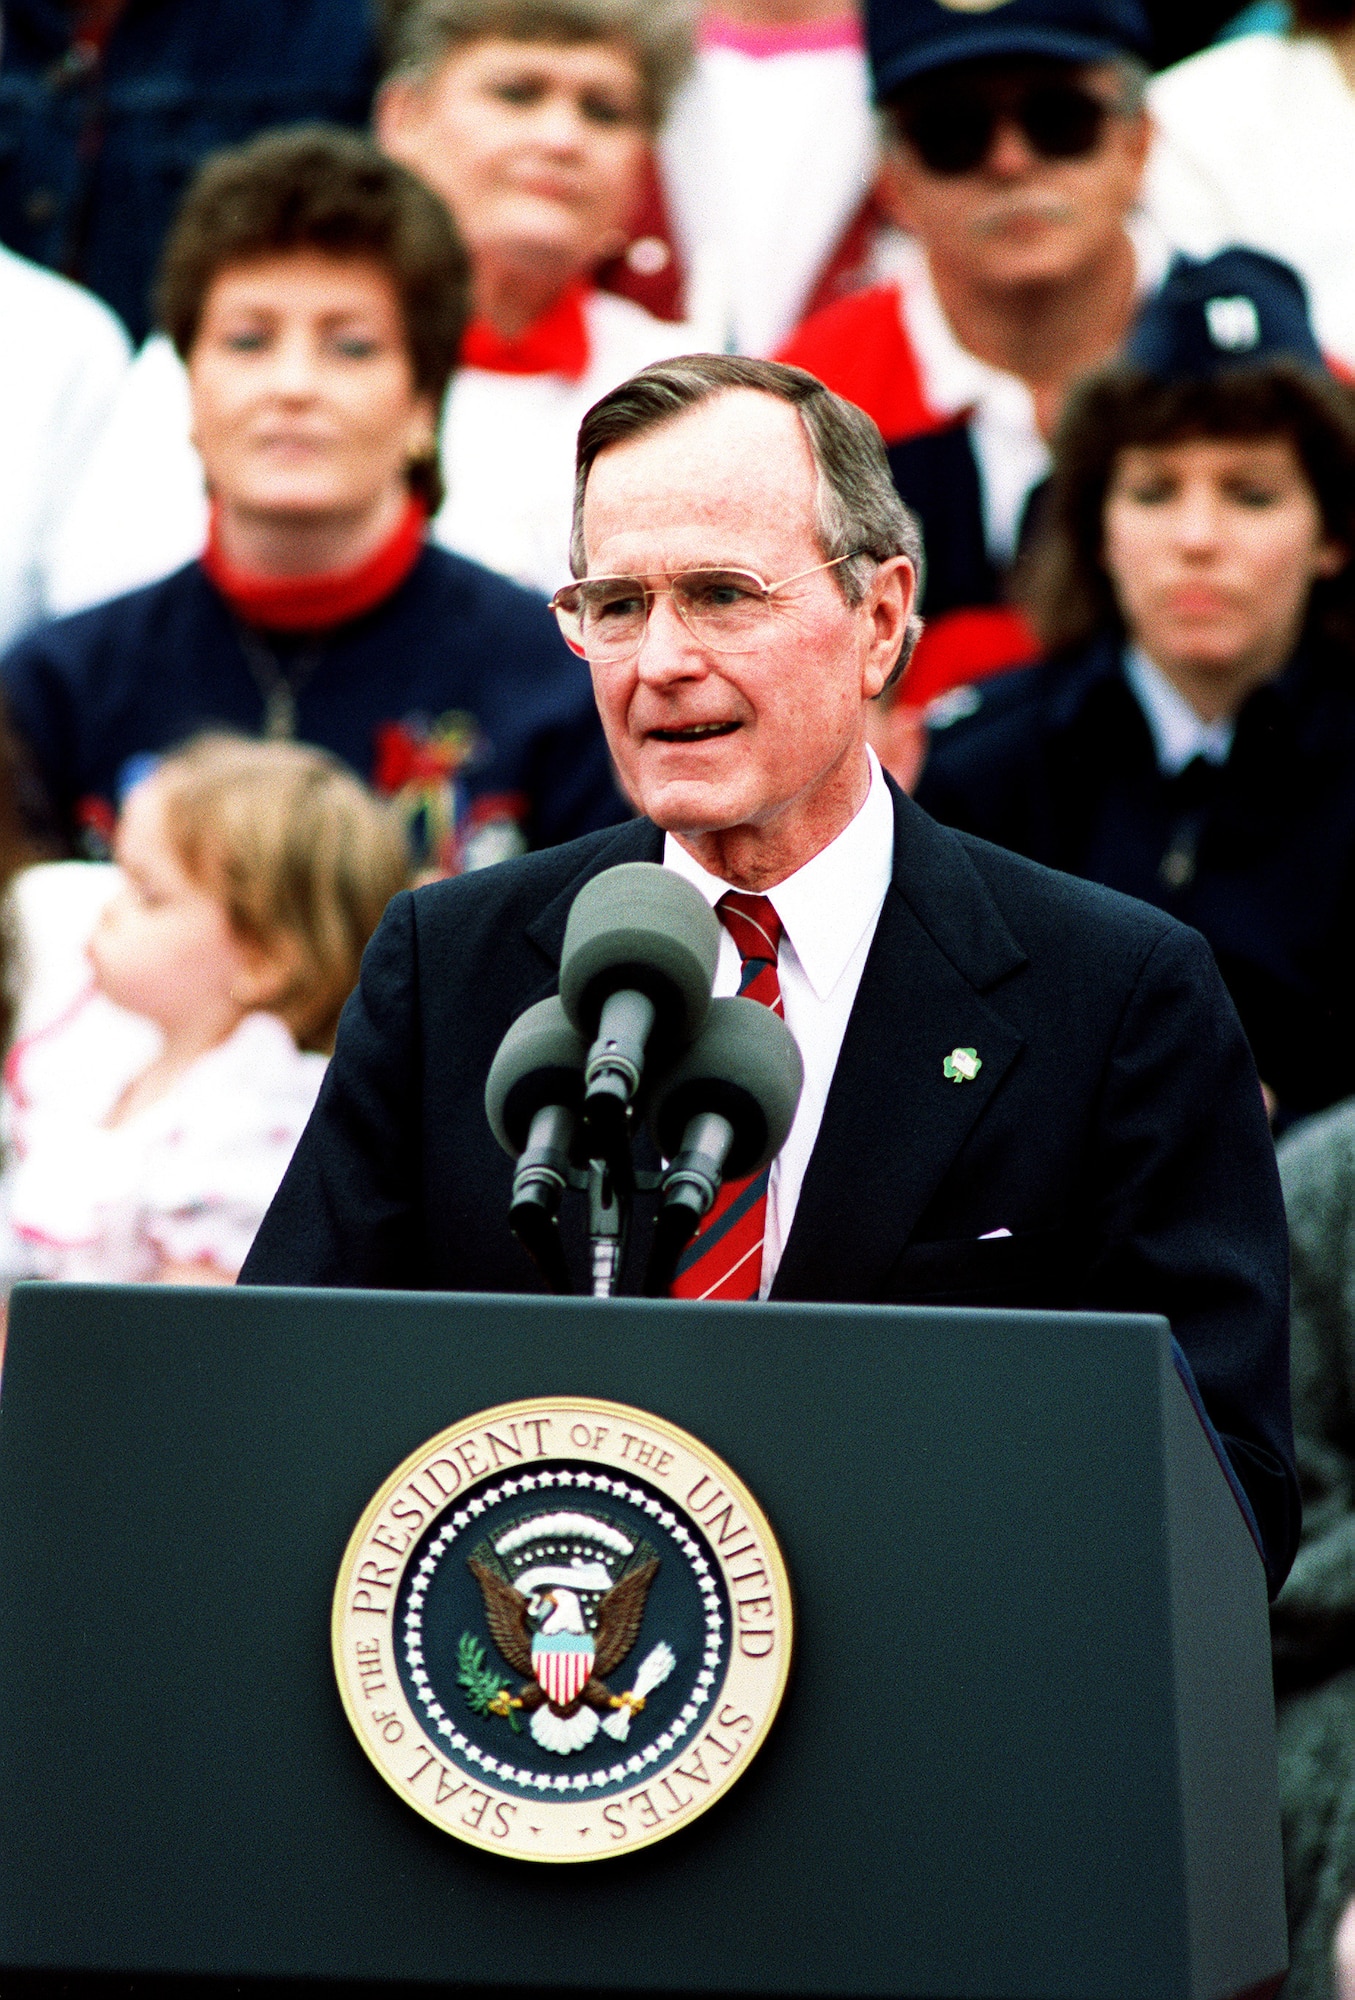 Pres. George H.W. Bush speaks during a welcoming ceremony for U.S. military personnel just returned from deployment in Saudi Arabia during Operation Desert Storm at Sumter, S.C., March 24, 1991. (Courtesy photo)